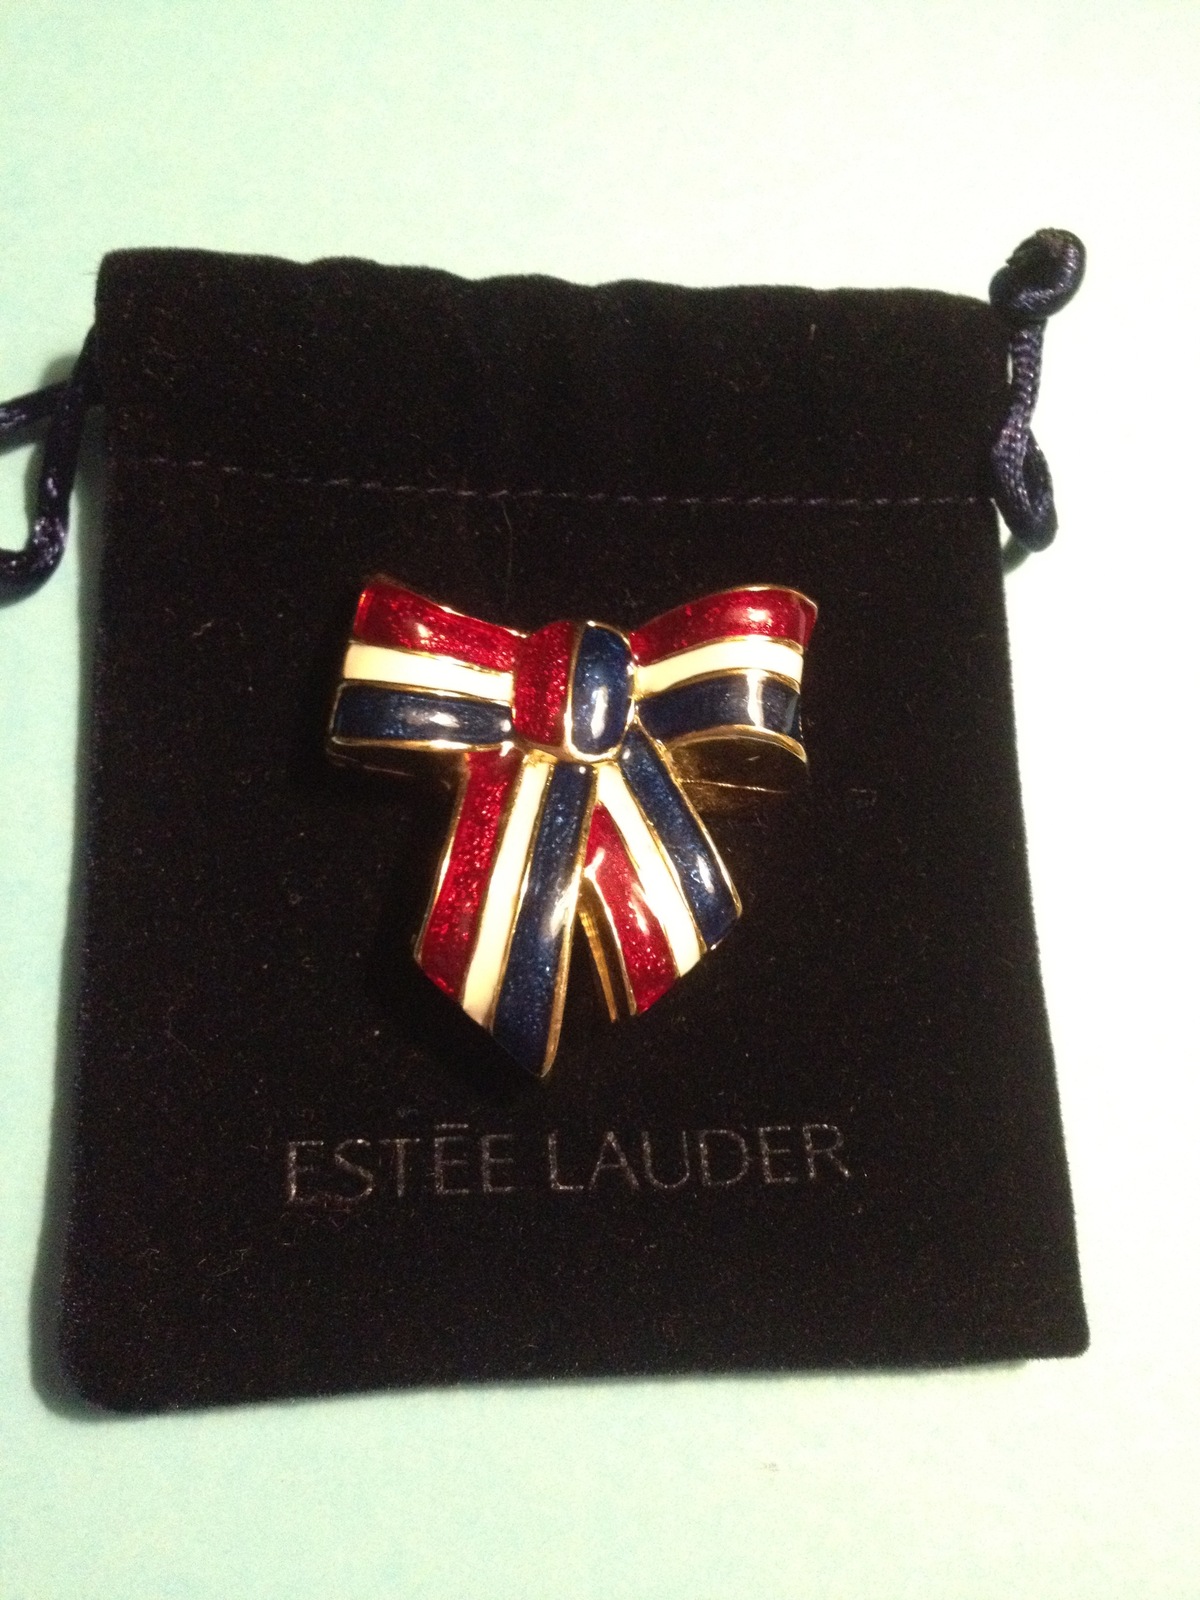 Primary image for Estee Lauder USA PATRIOTIC RIBBON 2003 Perfume Compact - Red White and Blue